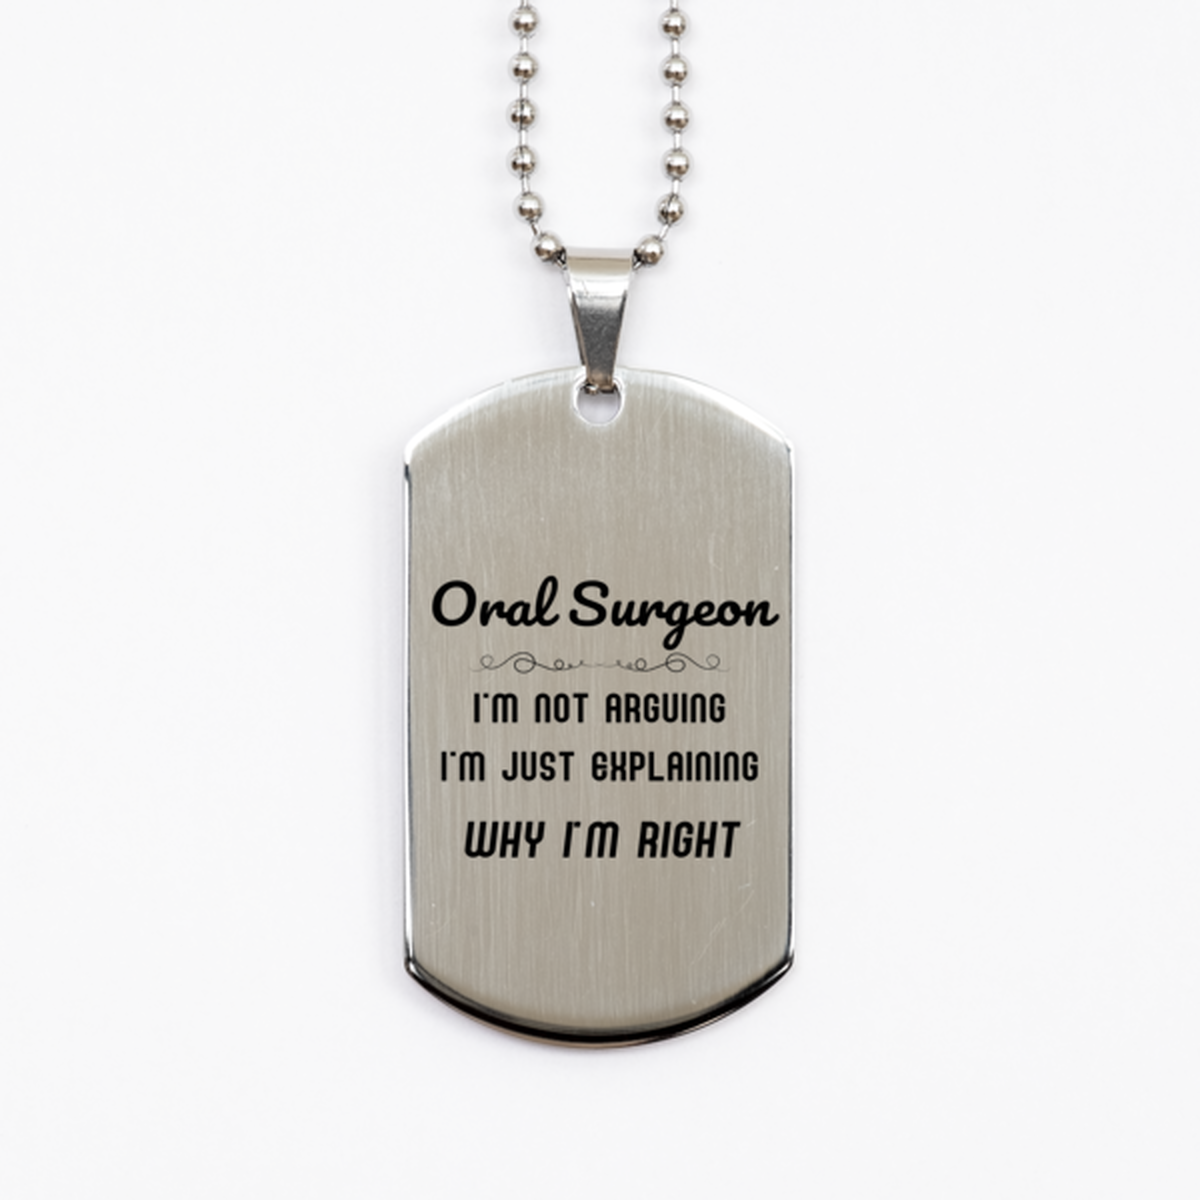 Oral Surgeon I'm not Arguing. I'm Just Explaining Why I'm RIGHT Silver Dog Tag, Funny Saying Quote Oral Surgeon Gifts For Oral Surgeon Graduation Birthday Christmas Gifts for Men Women Coworker